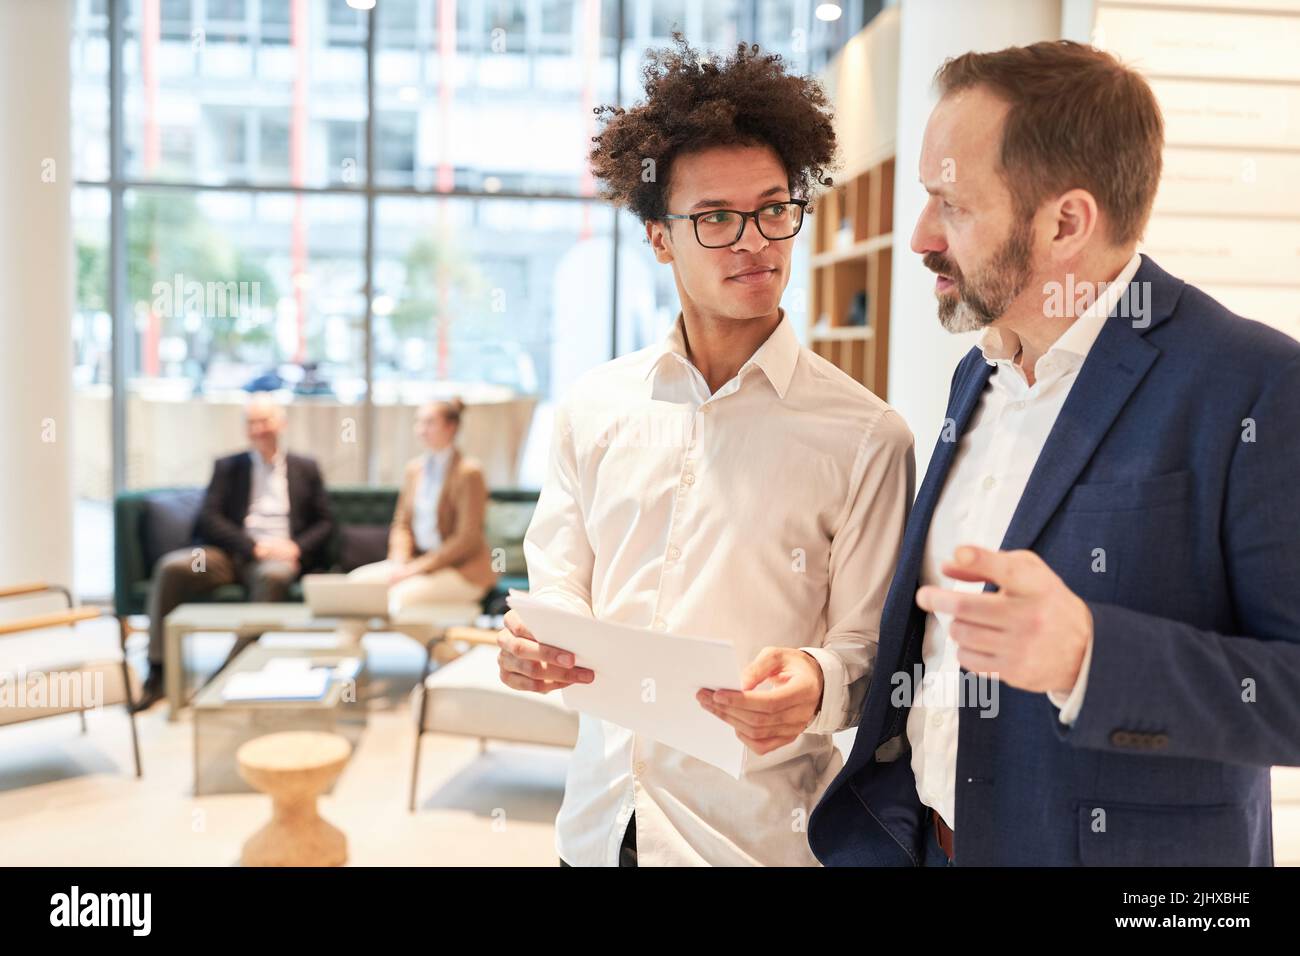 Young business man as a start-up founder and manager in a negotiation or consultation Stock Photo